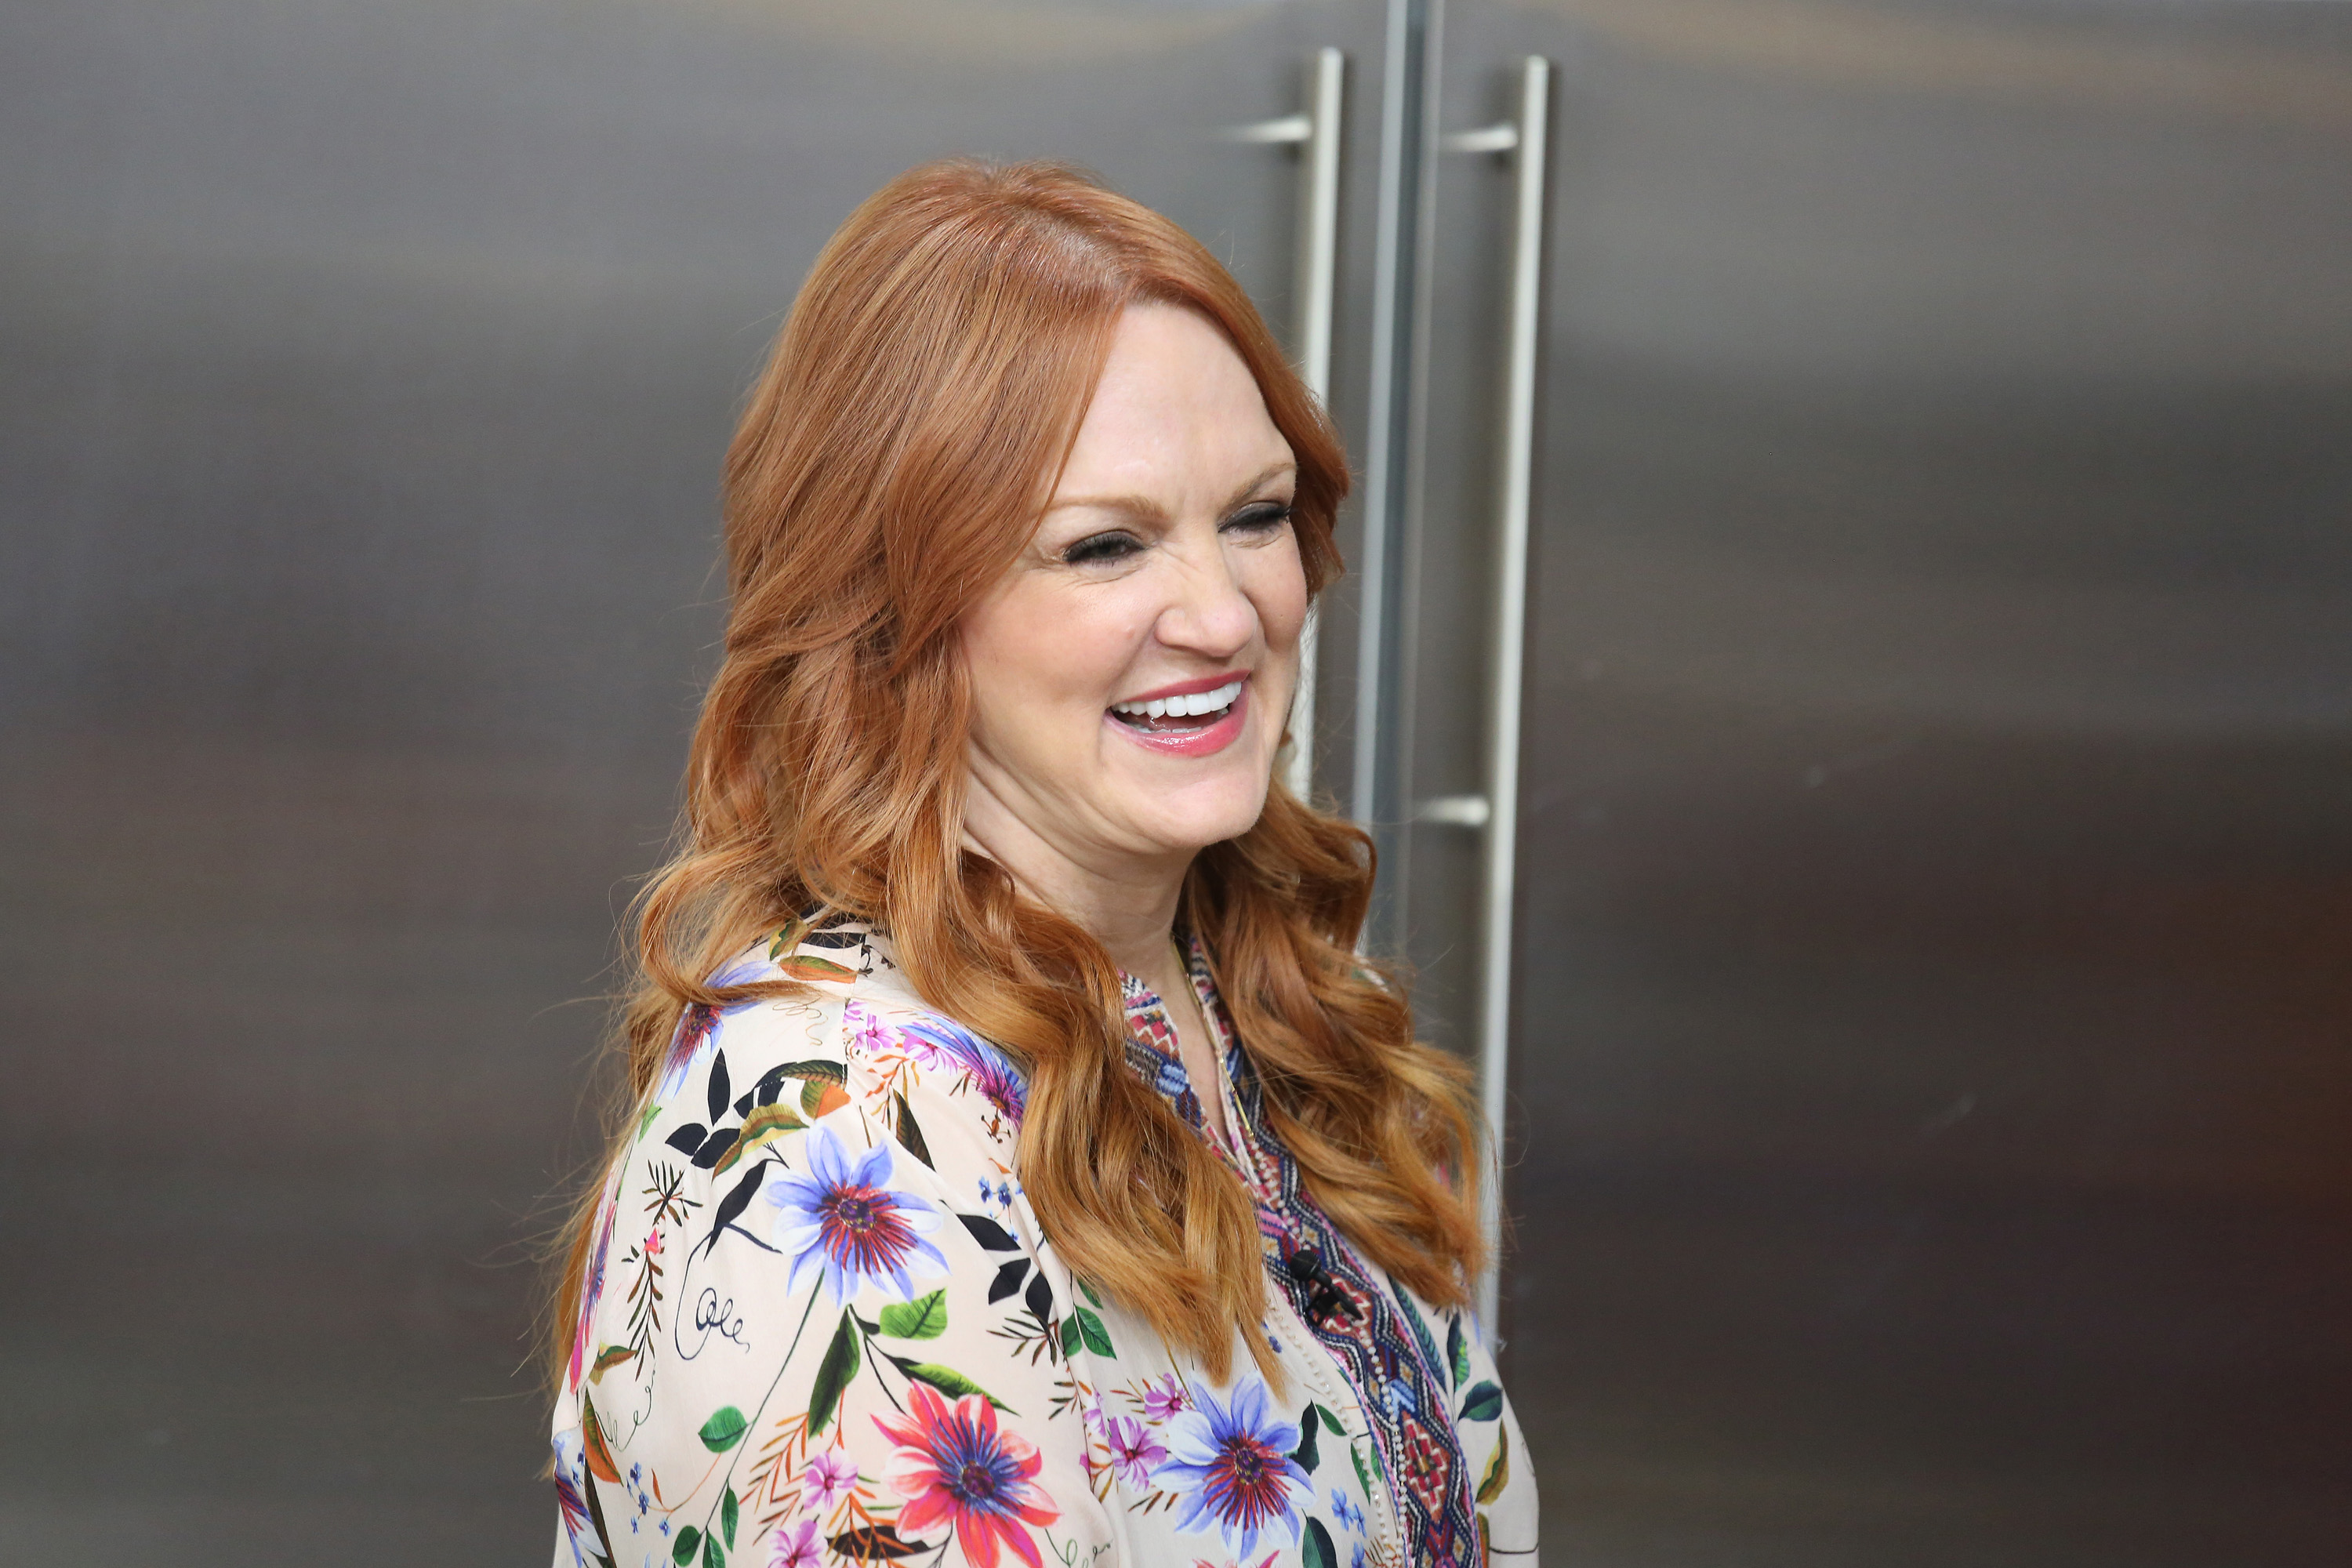 'The Pioneer Woman' host, Ree Drummond, wears a printed top and smiles at the camera.